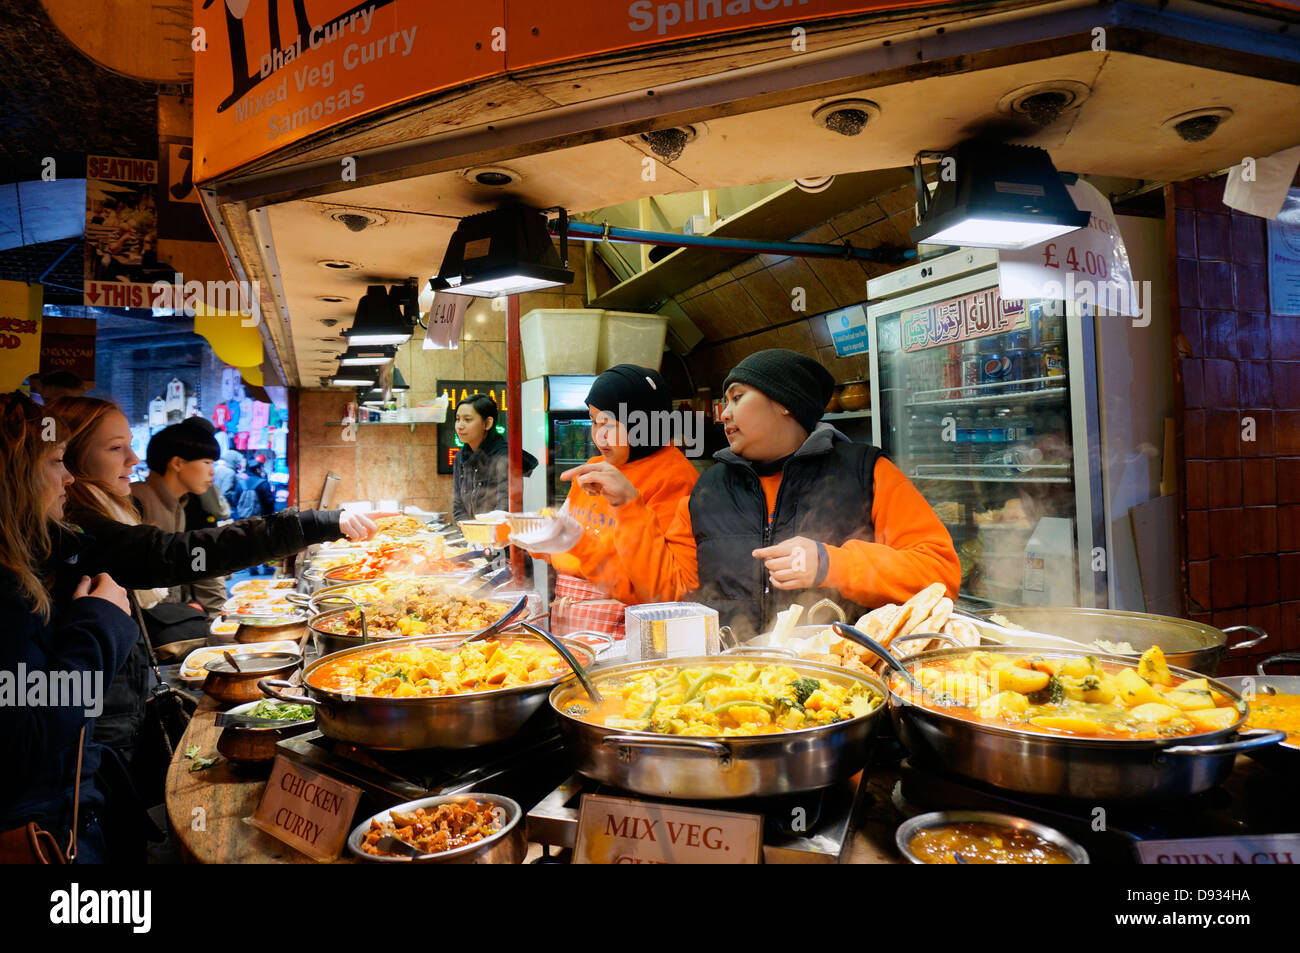 Customers being served at an Indian curry fast food stall at Camden Market, London, England, UK. Stock Photo